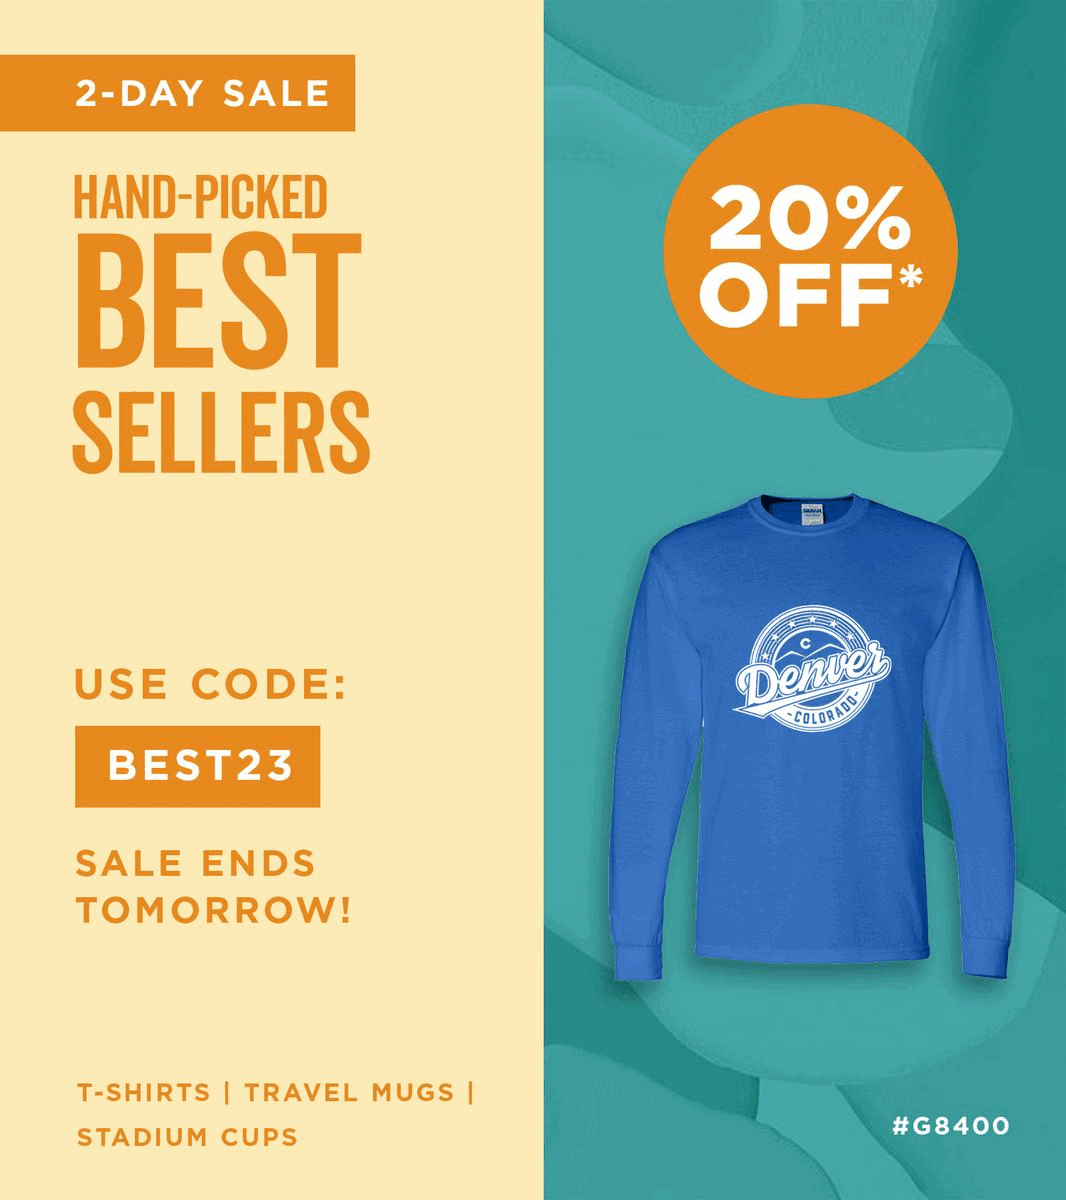 Hand-Picked Best Sellers | 20% Off Best Sellers | Use Code: BEST23 | Shop Now | Discount applies to t-shirts, travel mugs and stadium cups.